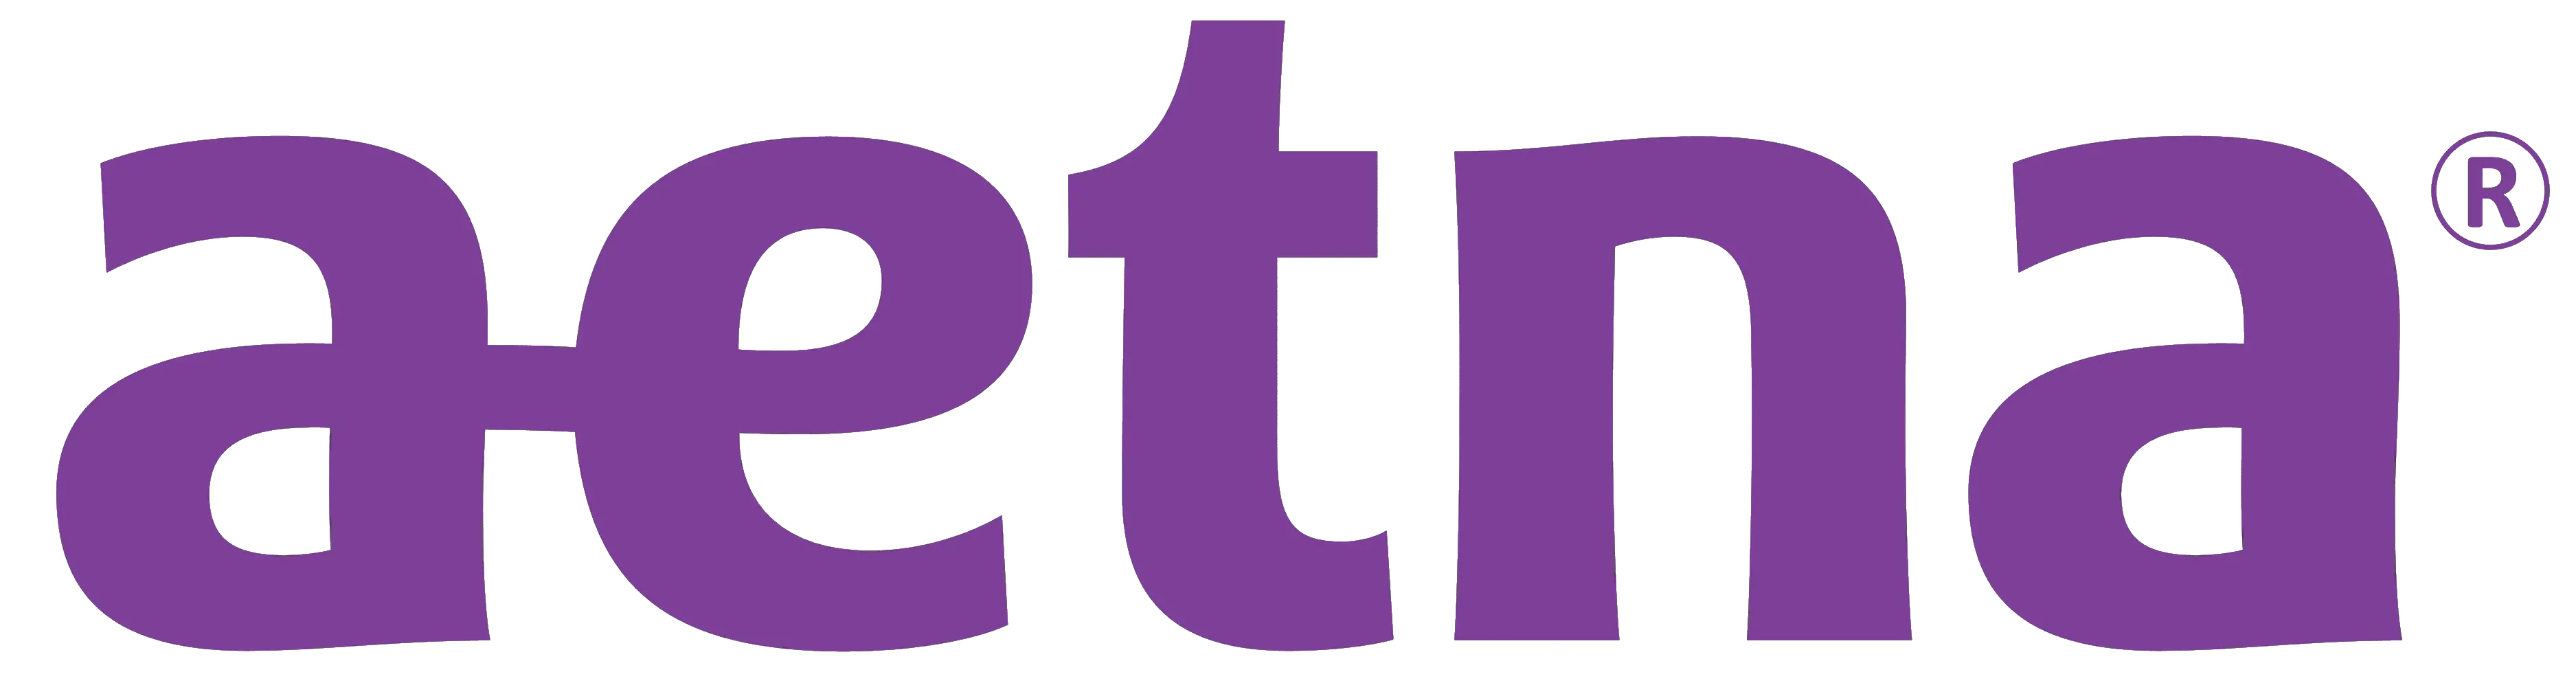 Aetna â Logos, brands and logotypes